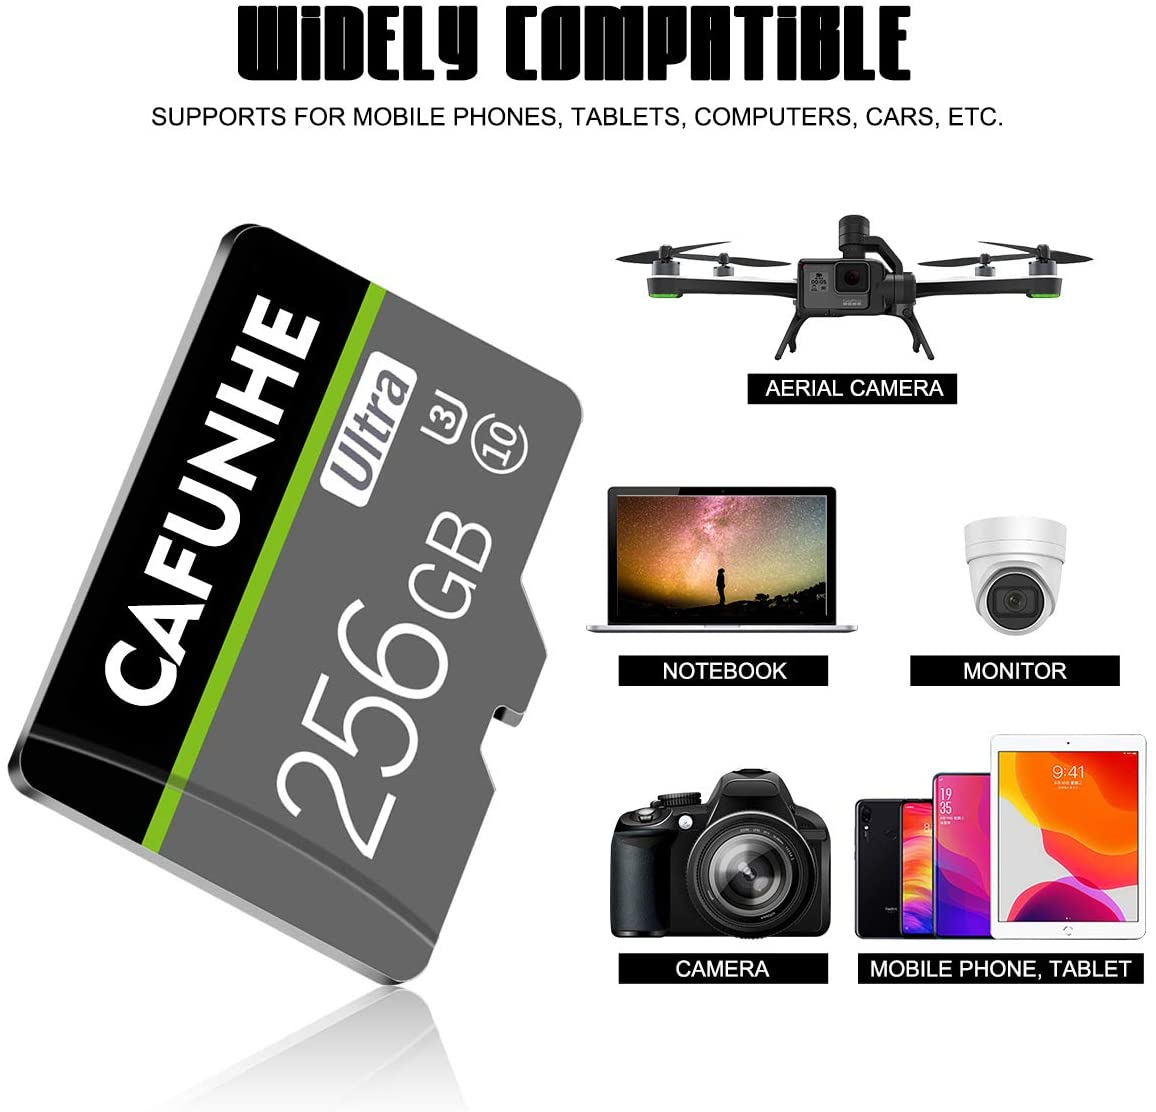 Micro SD Card 256GB Class 10 Memory Card 256GB TF Card for Android Smartphone Digital Camera Tablet and Drone